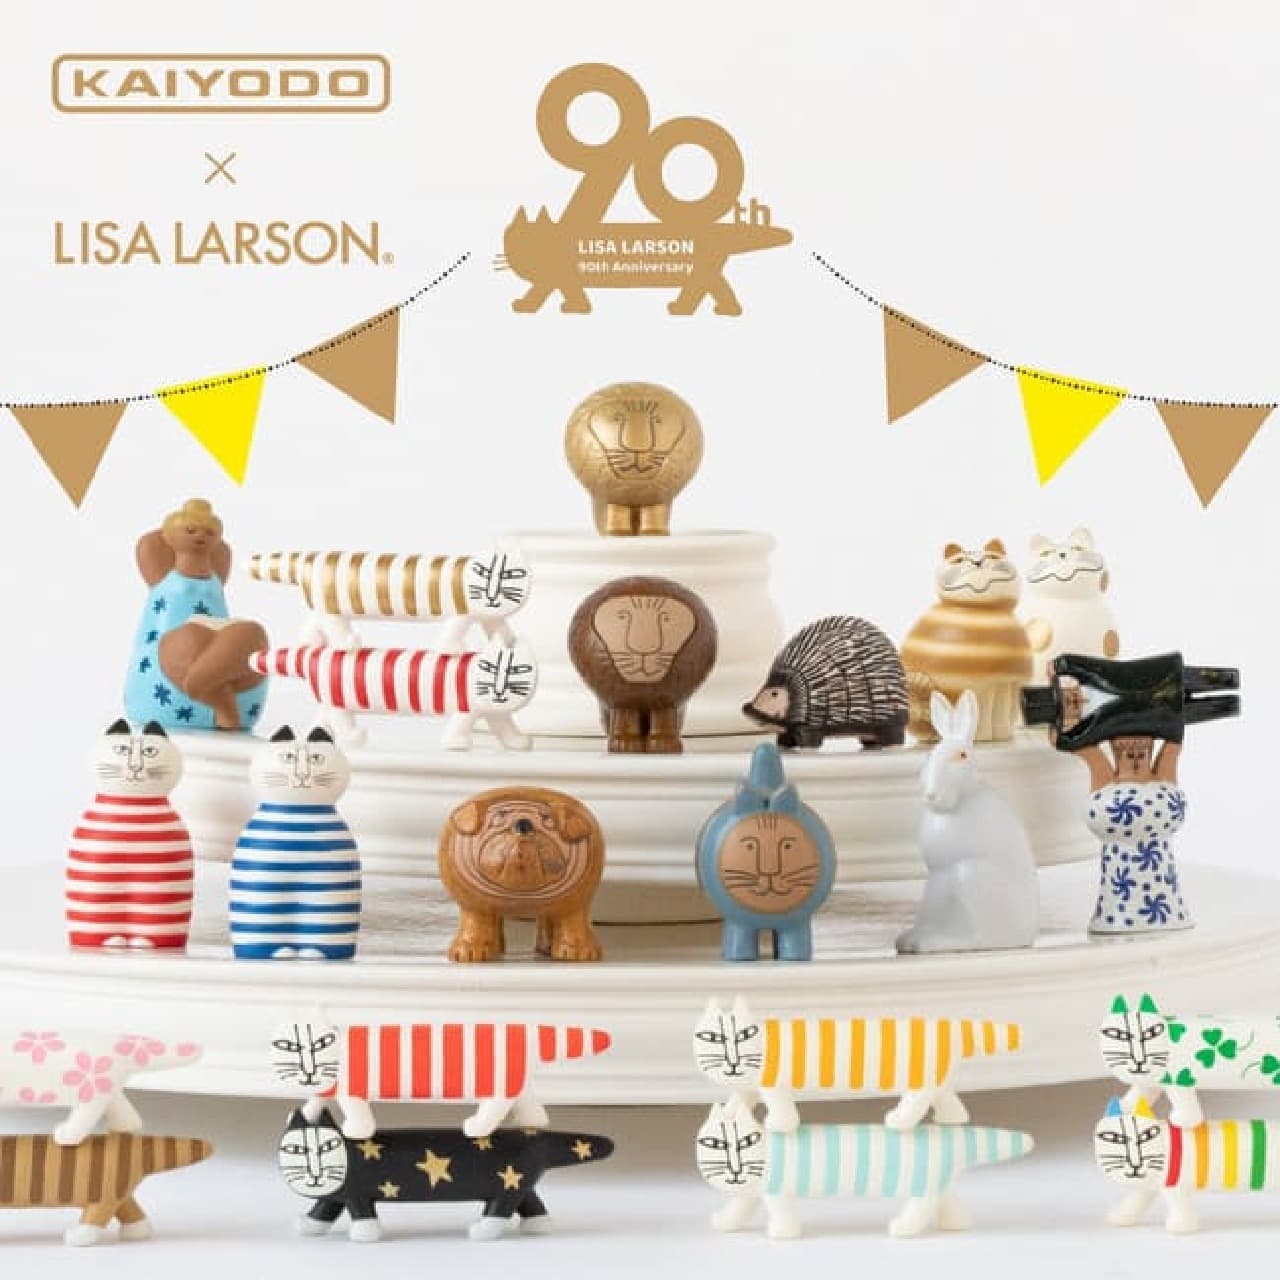 Lisa Larson 90th Anniversary Special Site --Collaboration with Kaiyodo, ANTIPAST, etc.